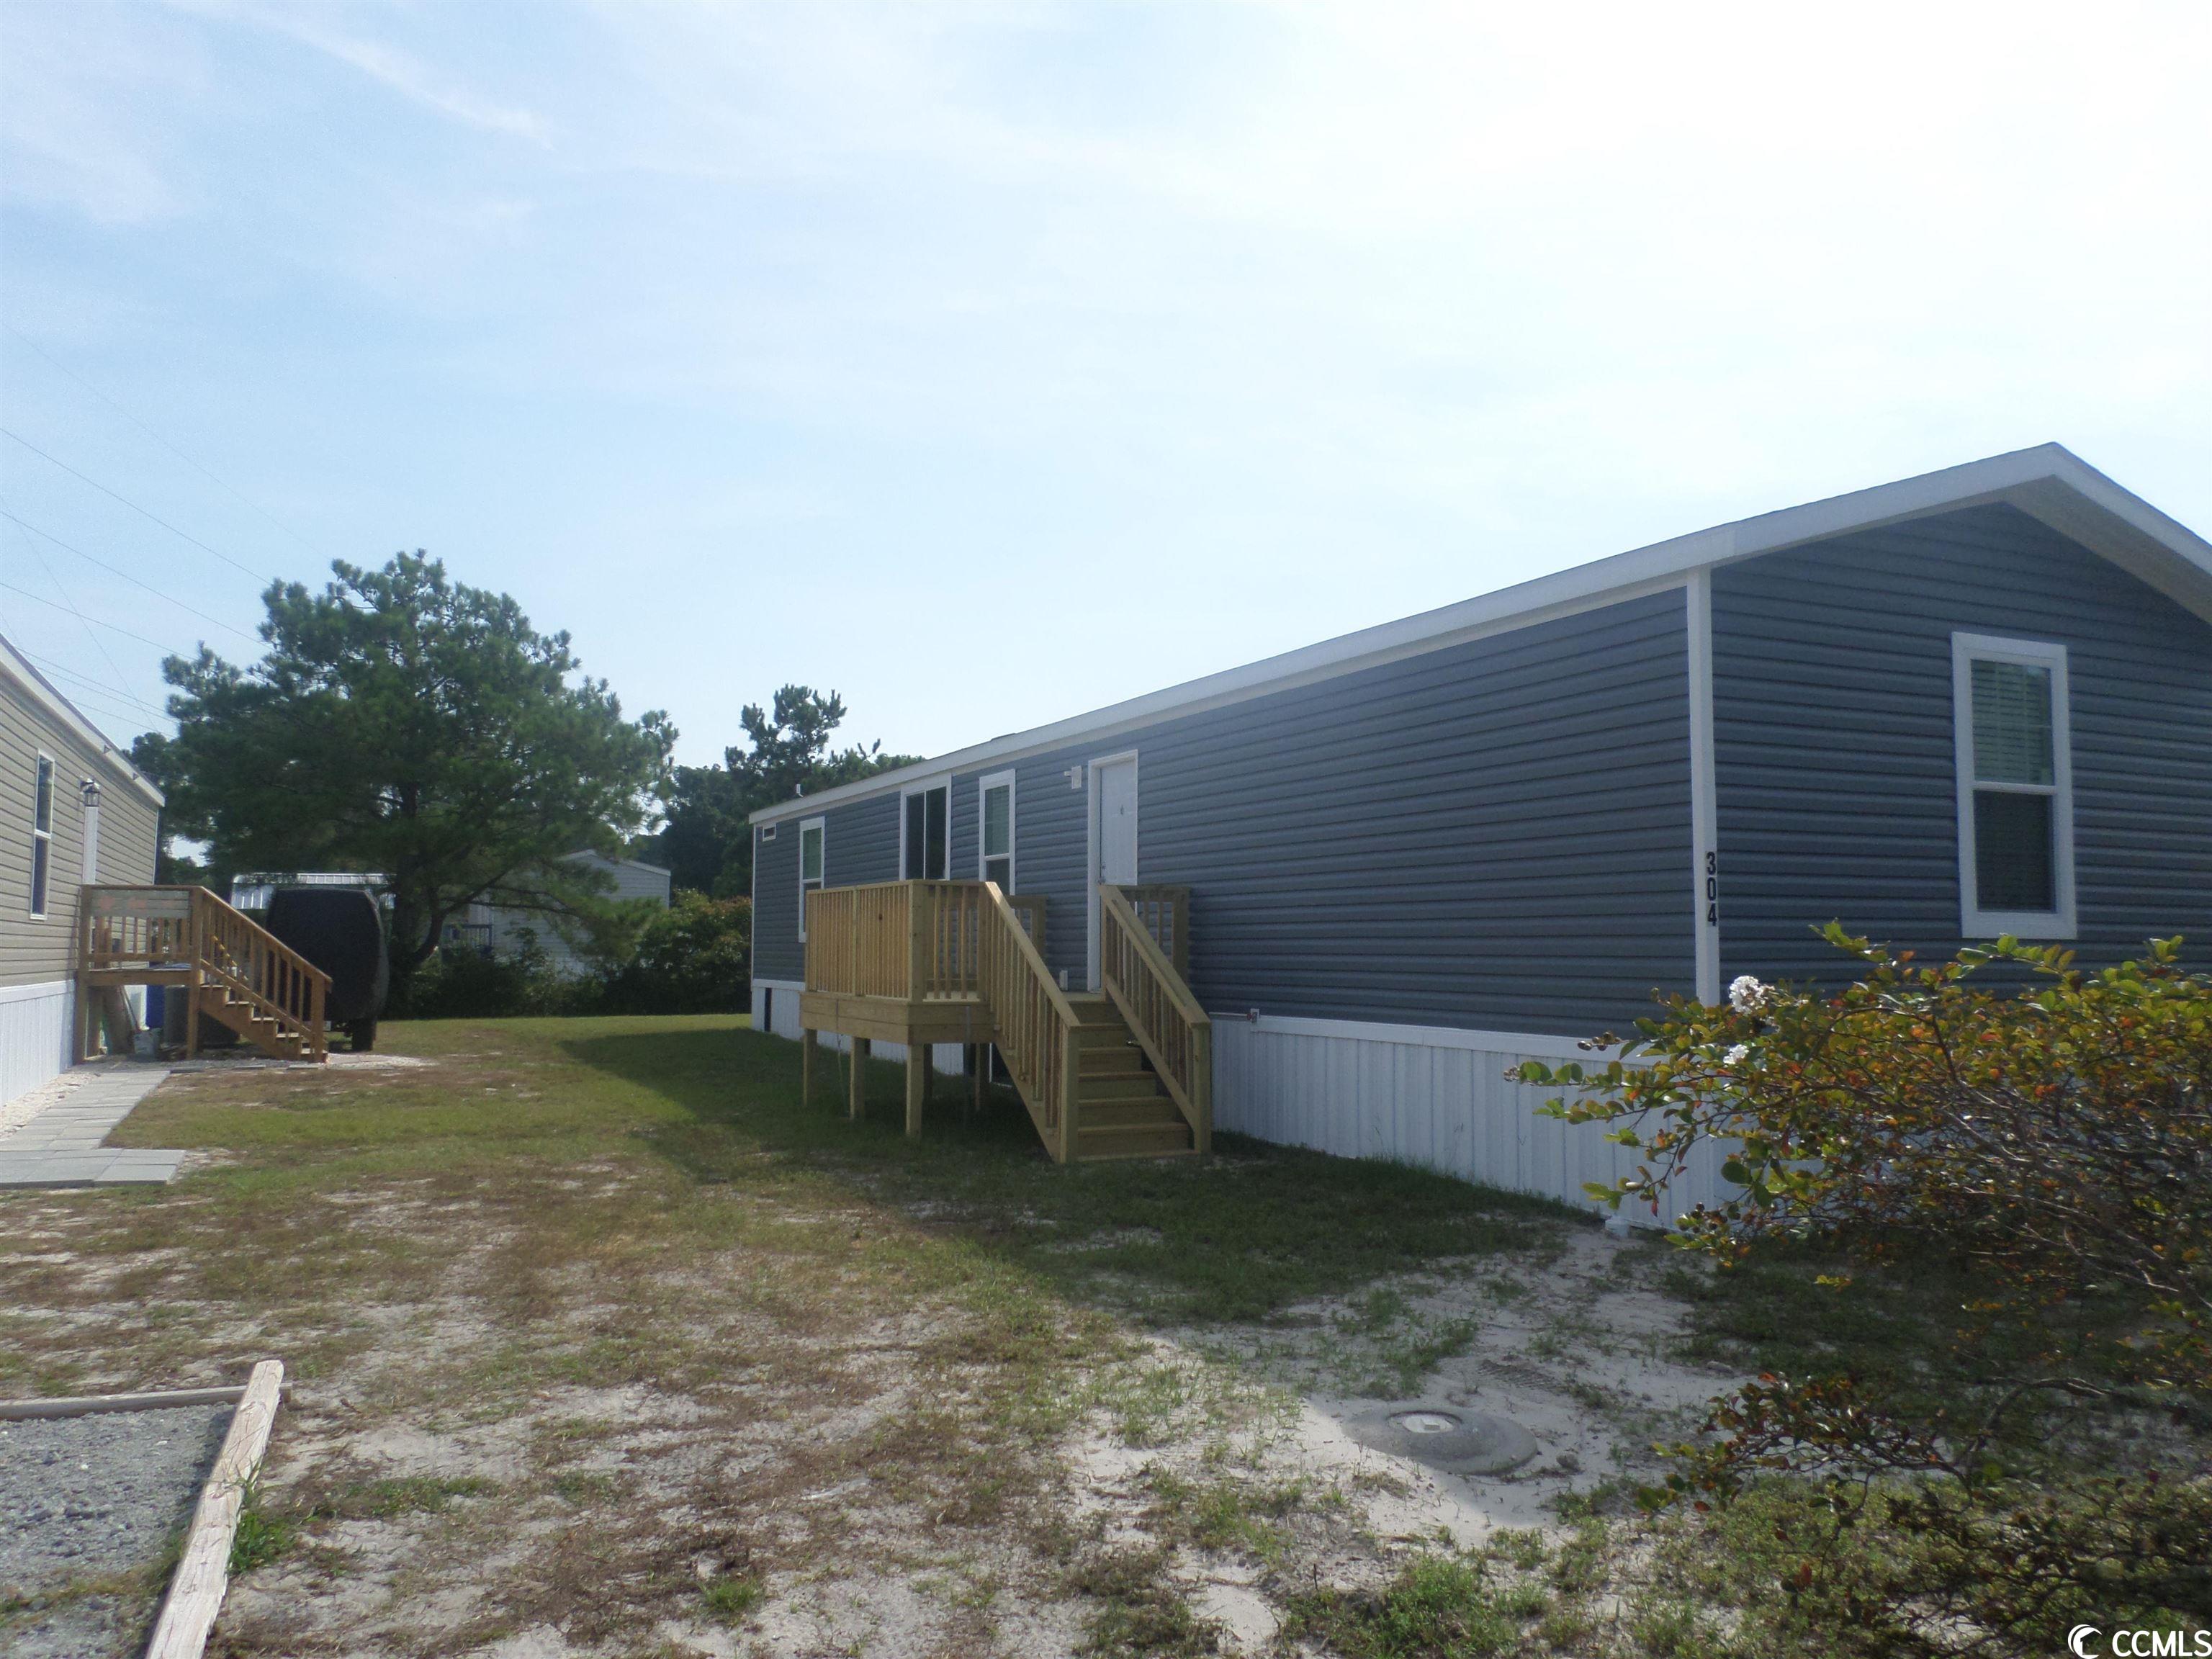 this beautiful new 3 bedroom 2 bath manufactured home is set up in the sought after creekside north myrtle beach community that offers amenities to include a pool, clubhouse, playground, and community mail boxes. creekside is a leased lot community which is close to the intracoastal waterway and atlantic ocean. the decks on the front and rear of the home are great for relaxation and entertaining. the home is finished off with vinyl under skirting and will provide protection for the crawl space foundation  and give a splash of additional curb appeal. as you enter the home, you walk into the living room, and to your left is the open kitchen with plenty of shelves with an island kitchen bar. the home has a split bedroom plan with master walk in closet and double sinks. the farmhouse kitchen sink is lovely and has plenty of space. a one year manufacturer's home warranty is being offered to the buyer. this lovely charmer is a must see today.